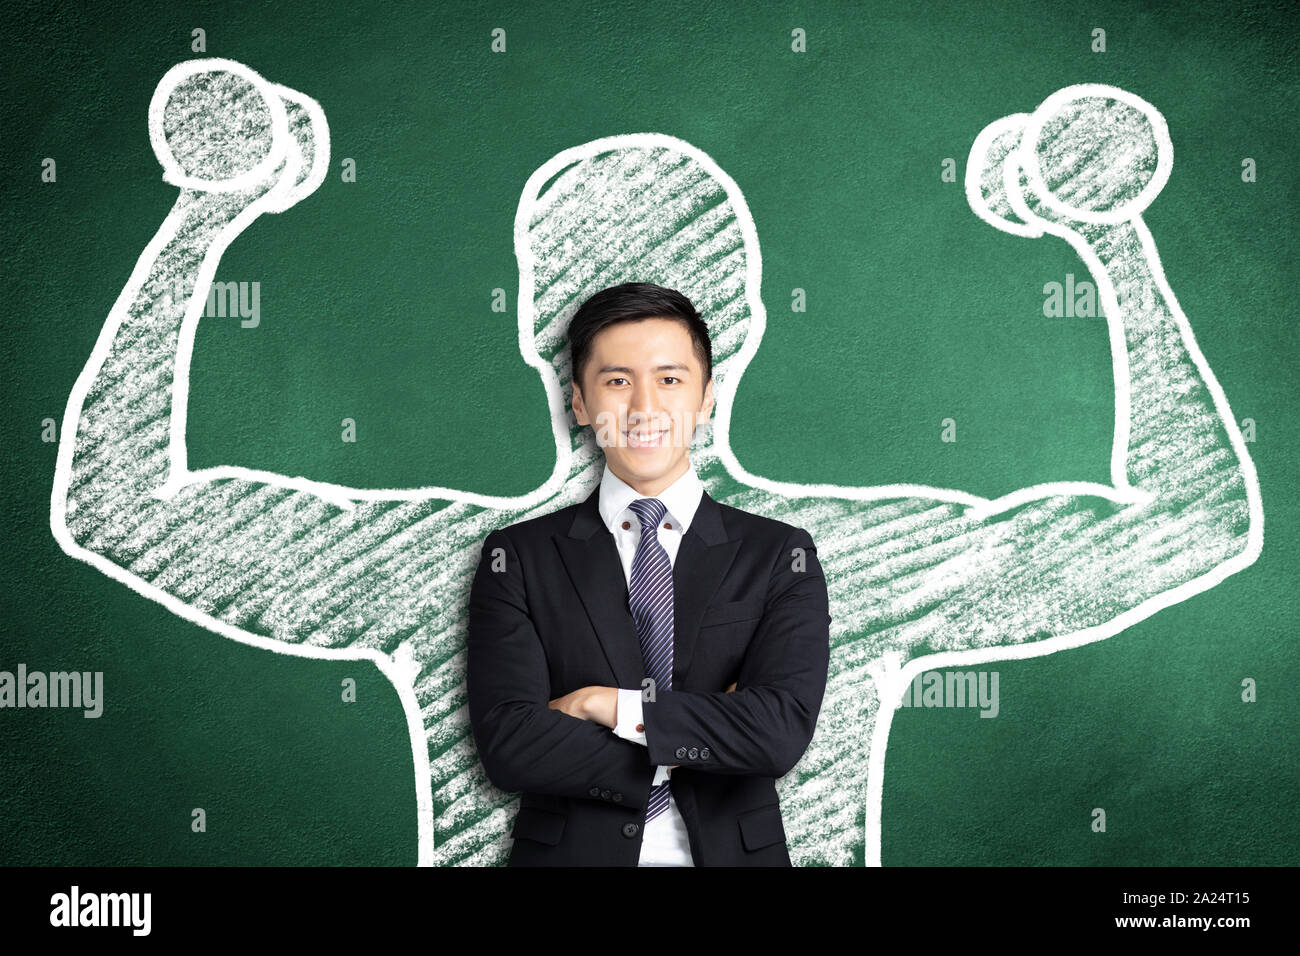 smiling asian business man with power gesture Stock Photo